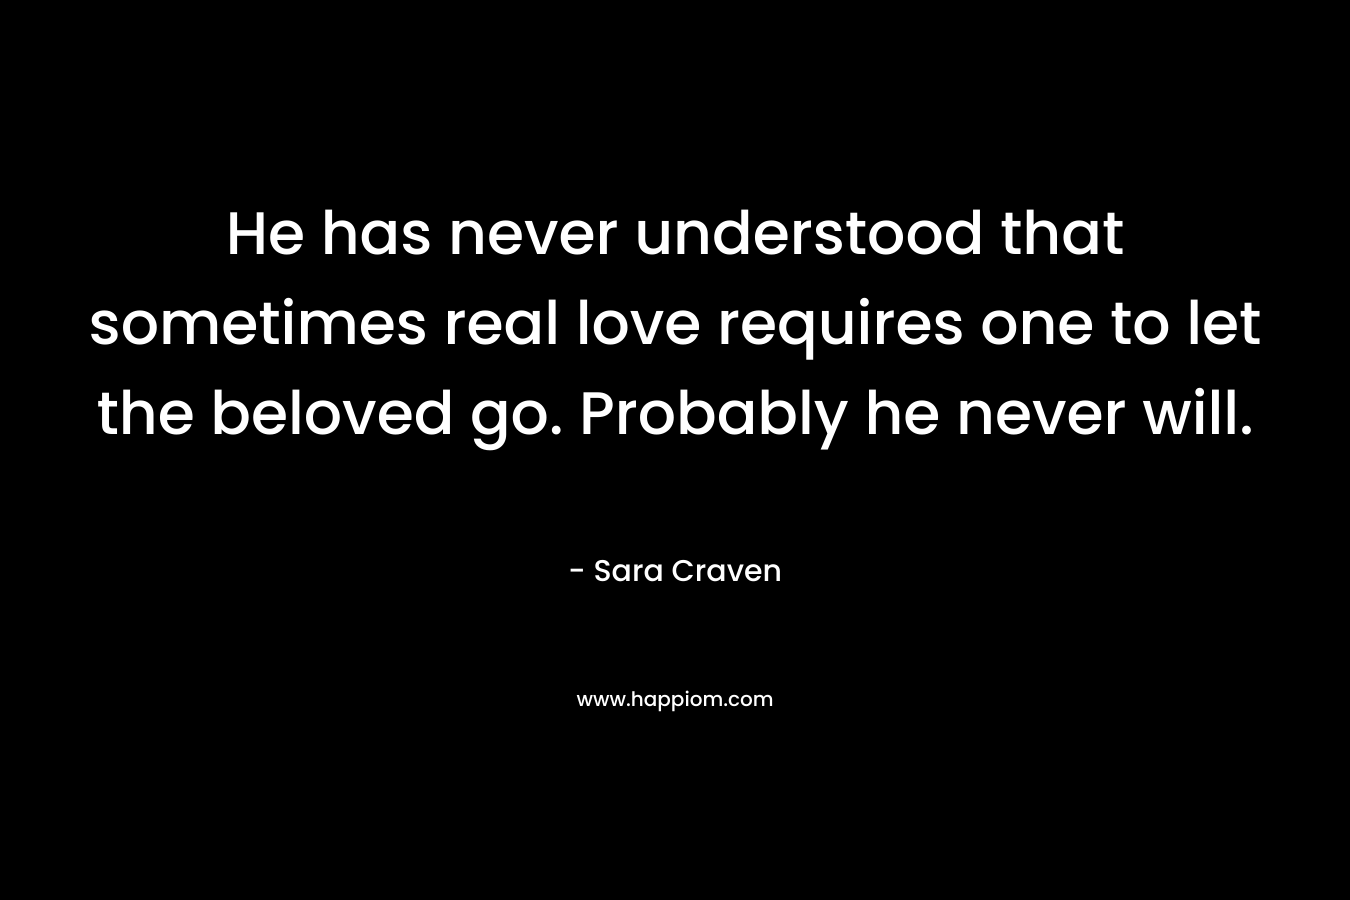 He has never understood that sometimes real love requires one to let the beloved go. Probably he never will. – Sara Craven